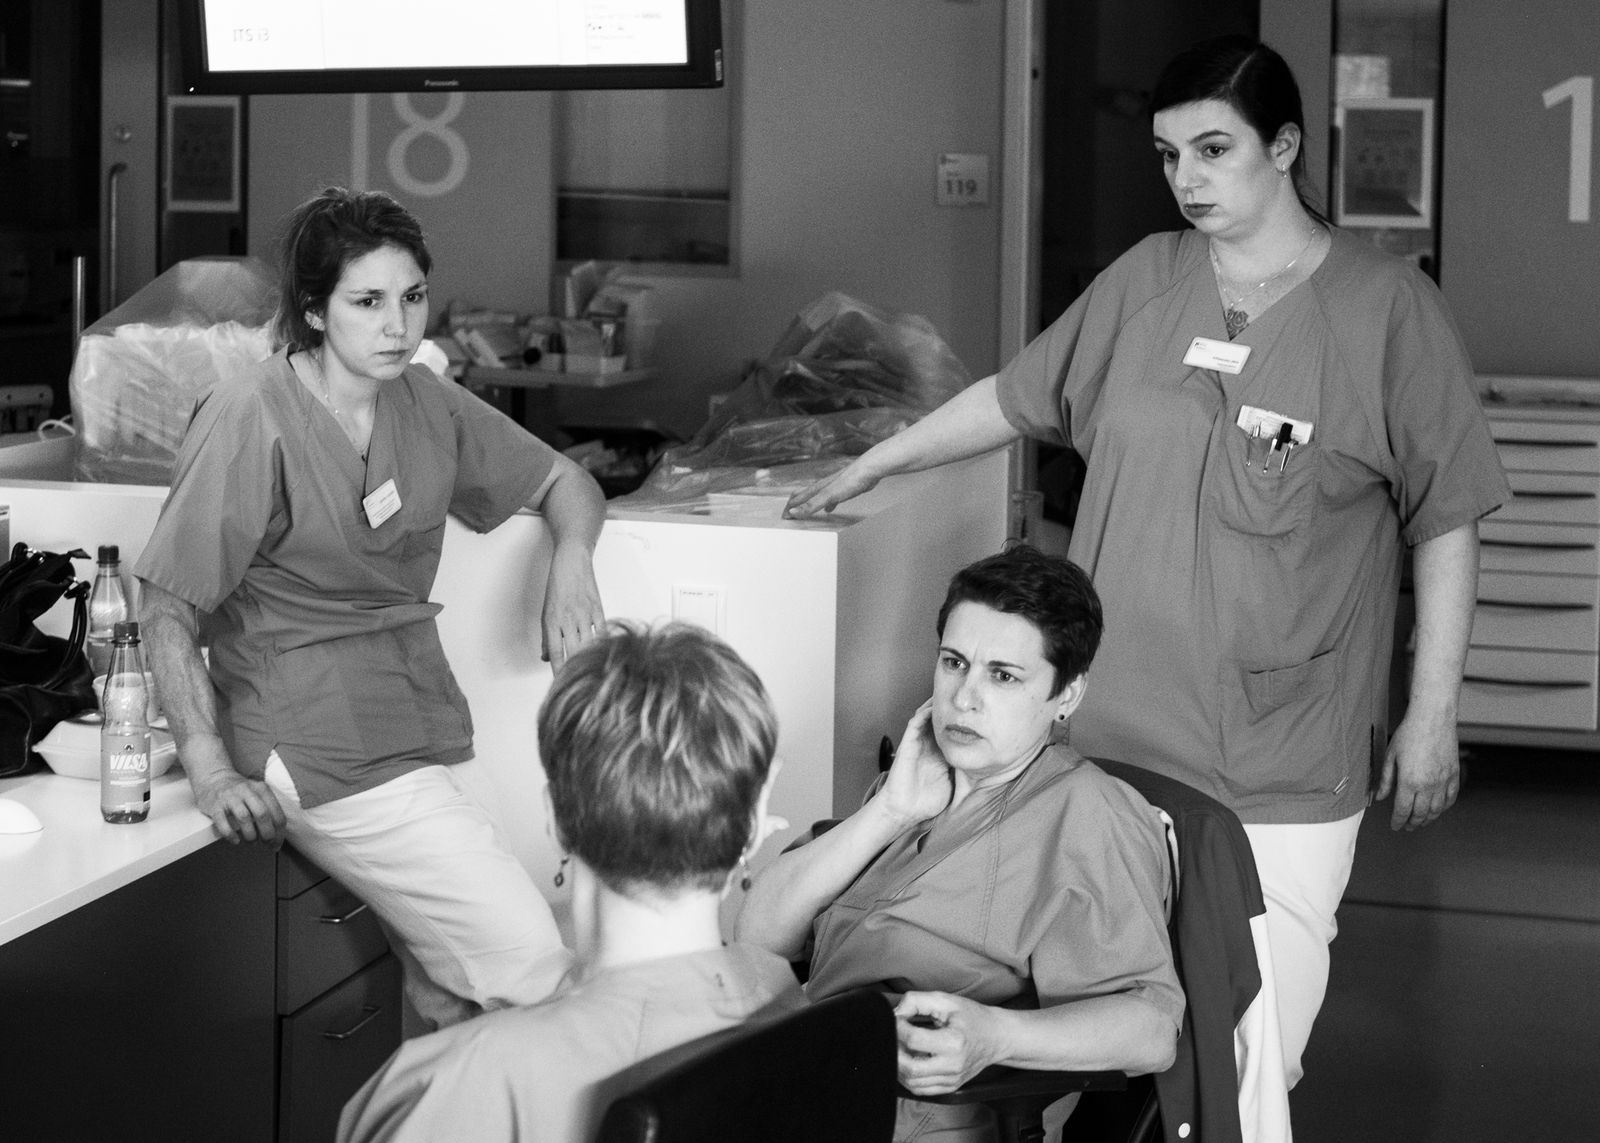 © Patricia Kühfuss - Image from the Never Done - Nurses in German Hospitals photography project